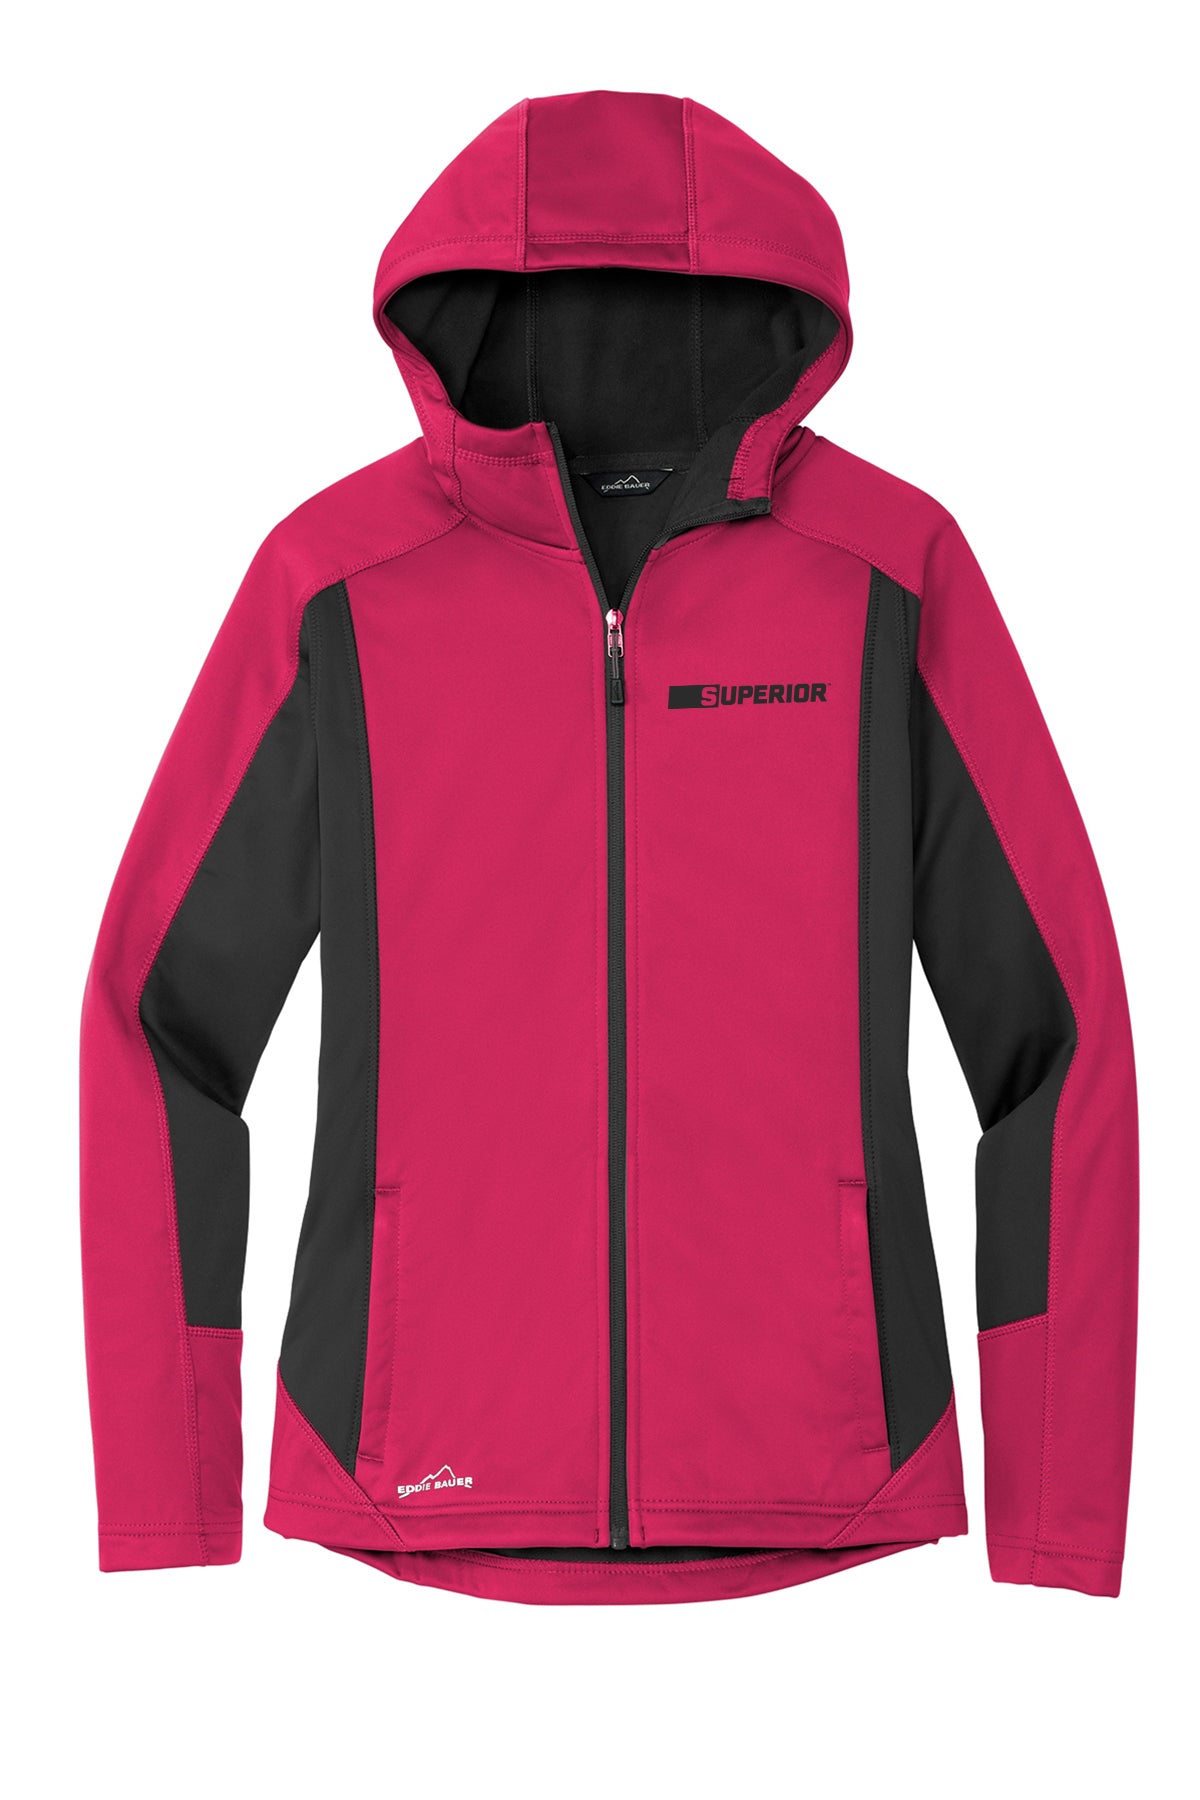 Eddie Bauer Fleece-lined Outdoor Jacket (Sunfaded Hot Pink) (women's),  Women's Fashion, Coats, Jackets and Outerwear on Carousell